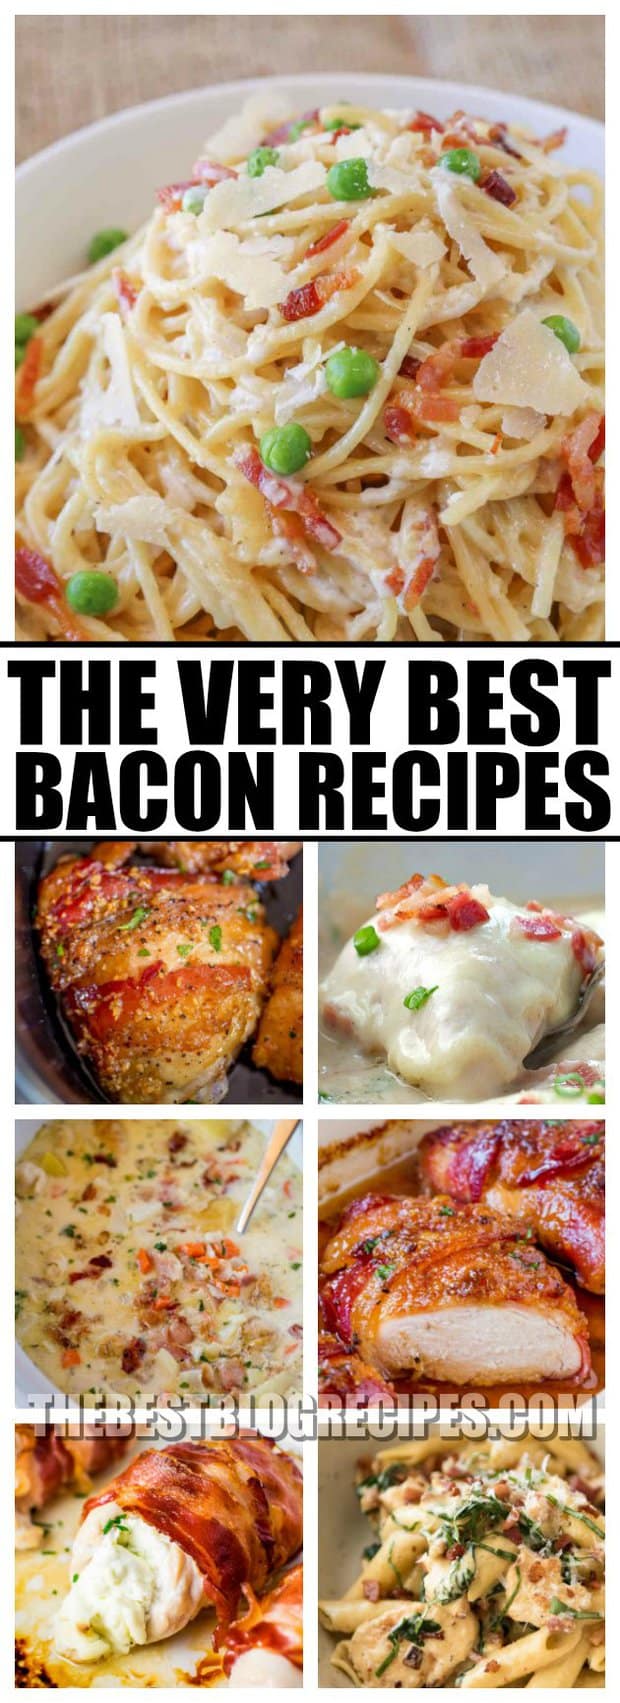 The Best Bacon Recipes